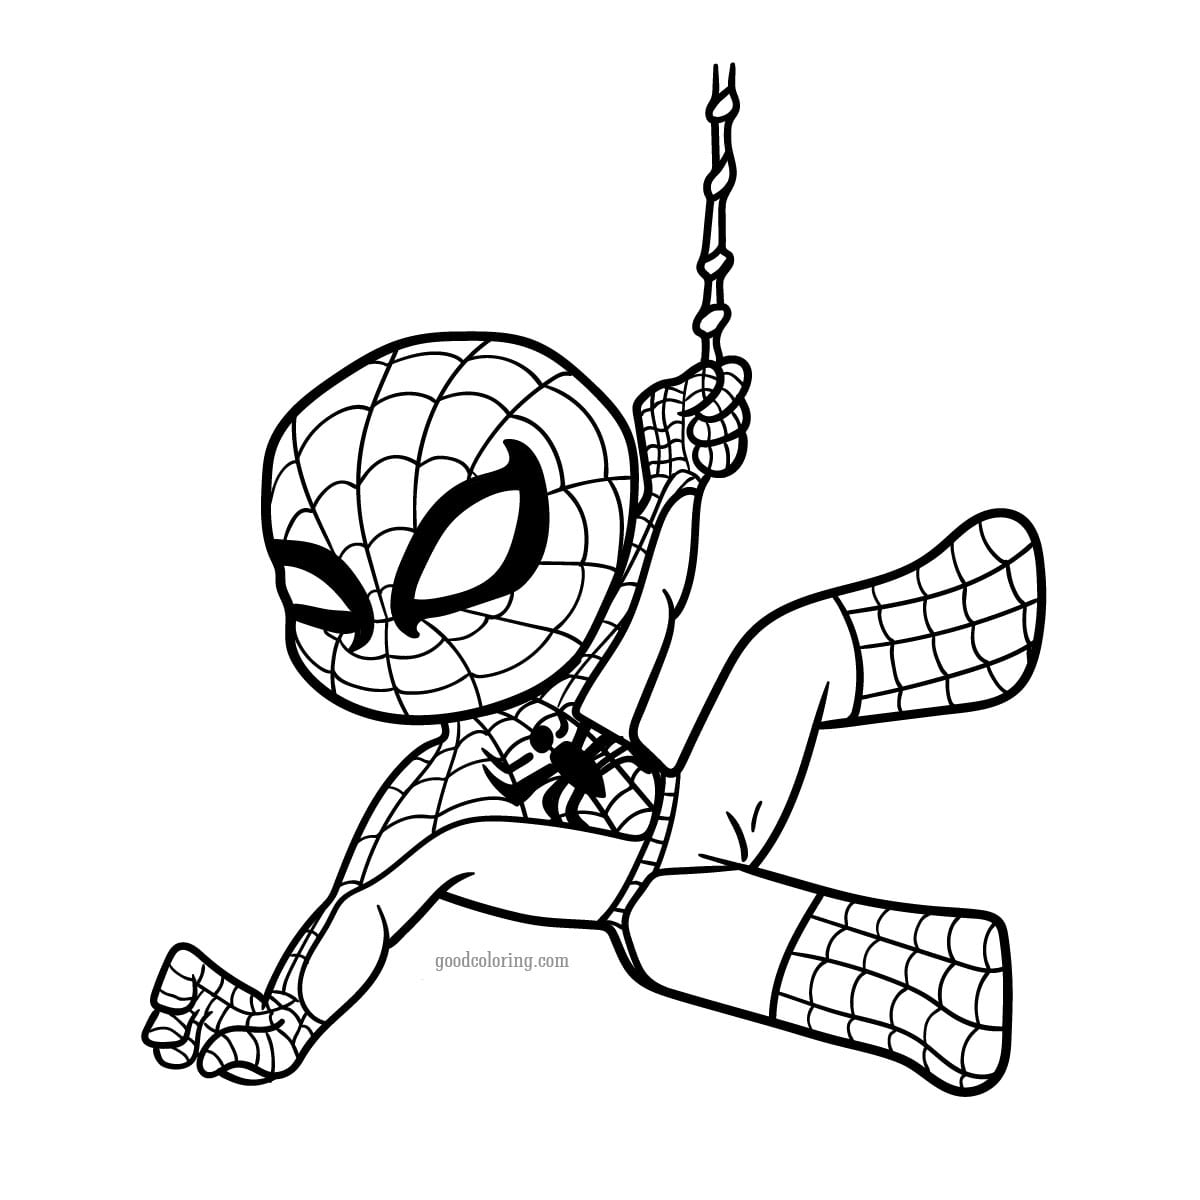 Cool Spiderman Coloring Pages   GoodColoring   Coloring Home